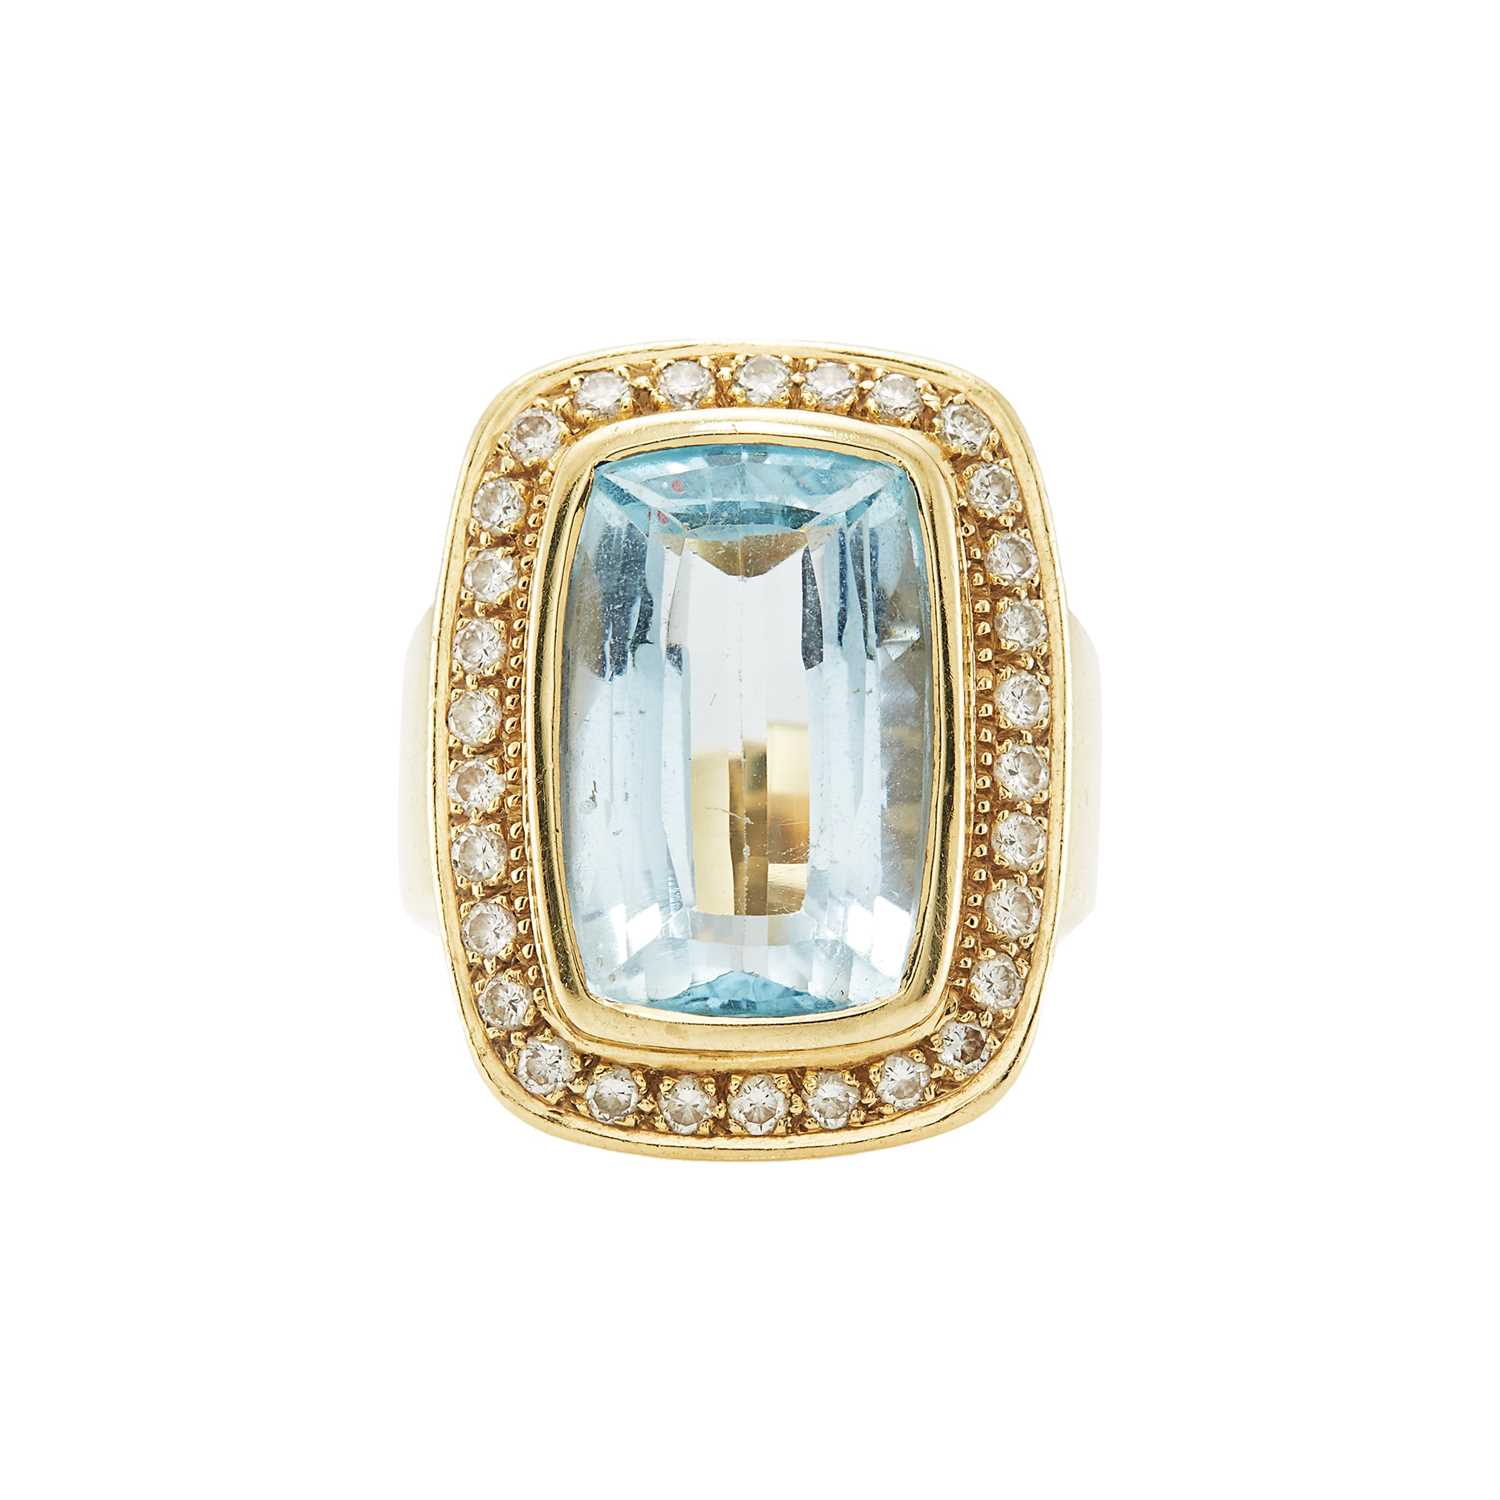 Lot 2023 - Gold, Blue Topaz and Diamond Ring